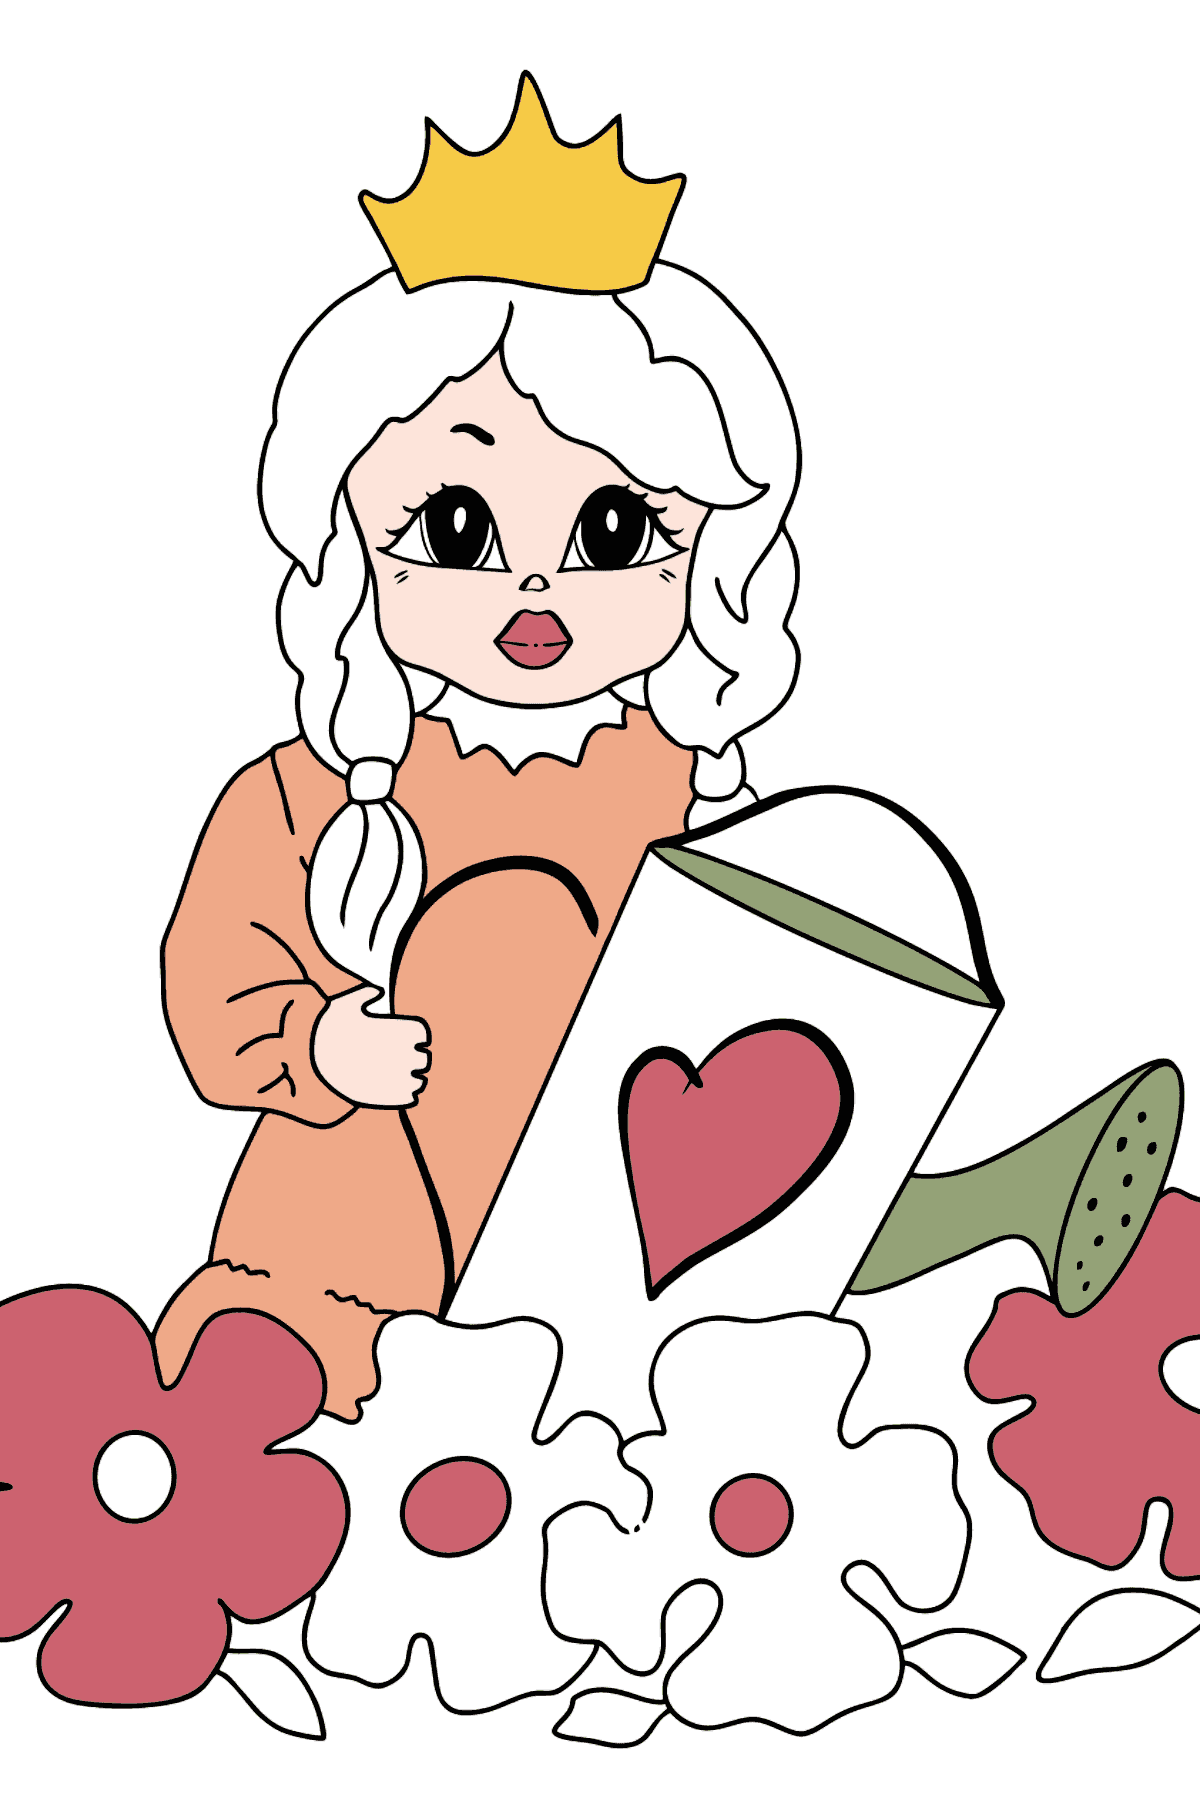 Coloring Page - A Princess with a Watering Can - Coloring Pages for Kids